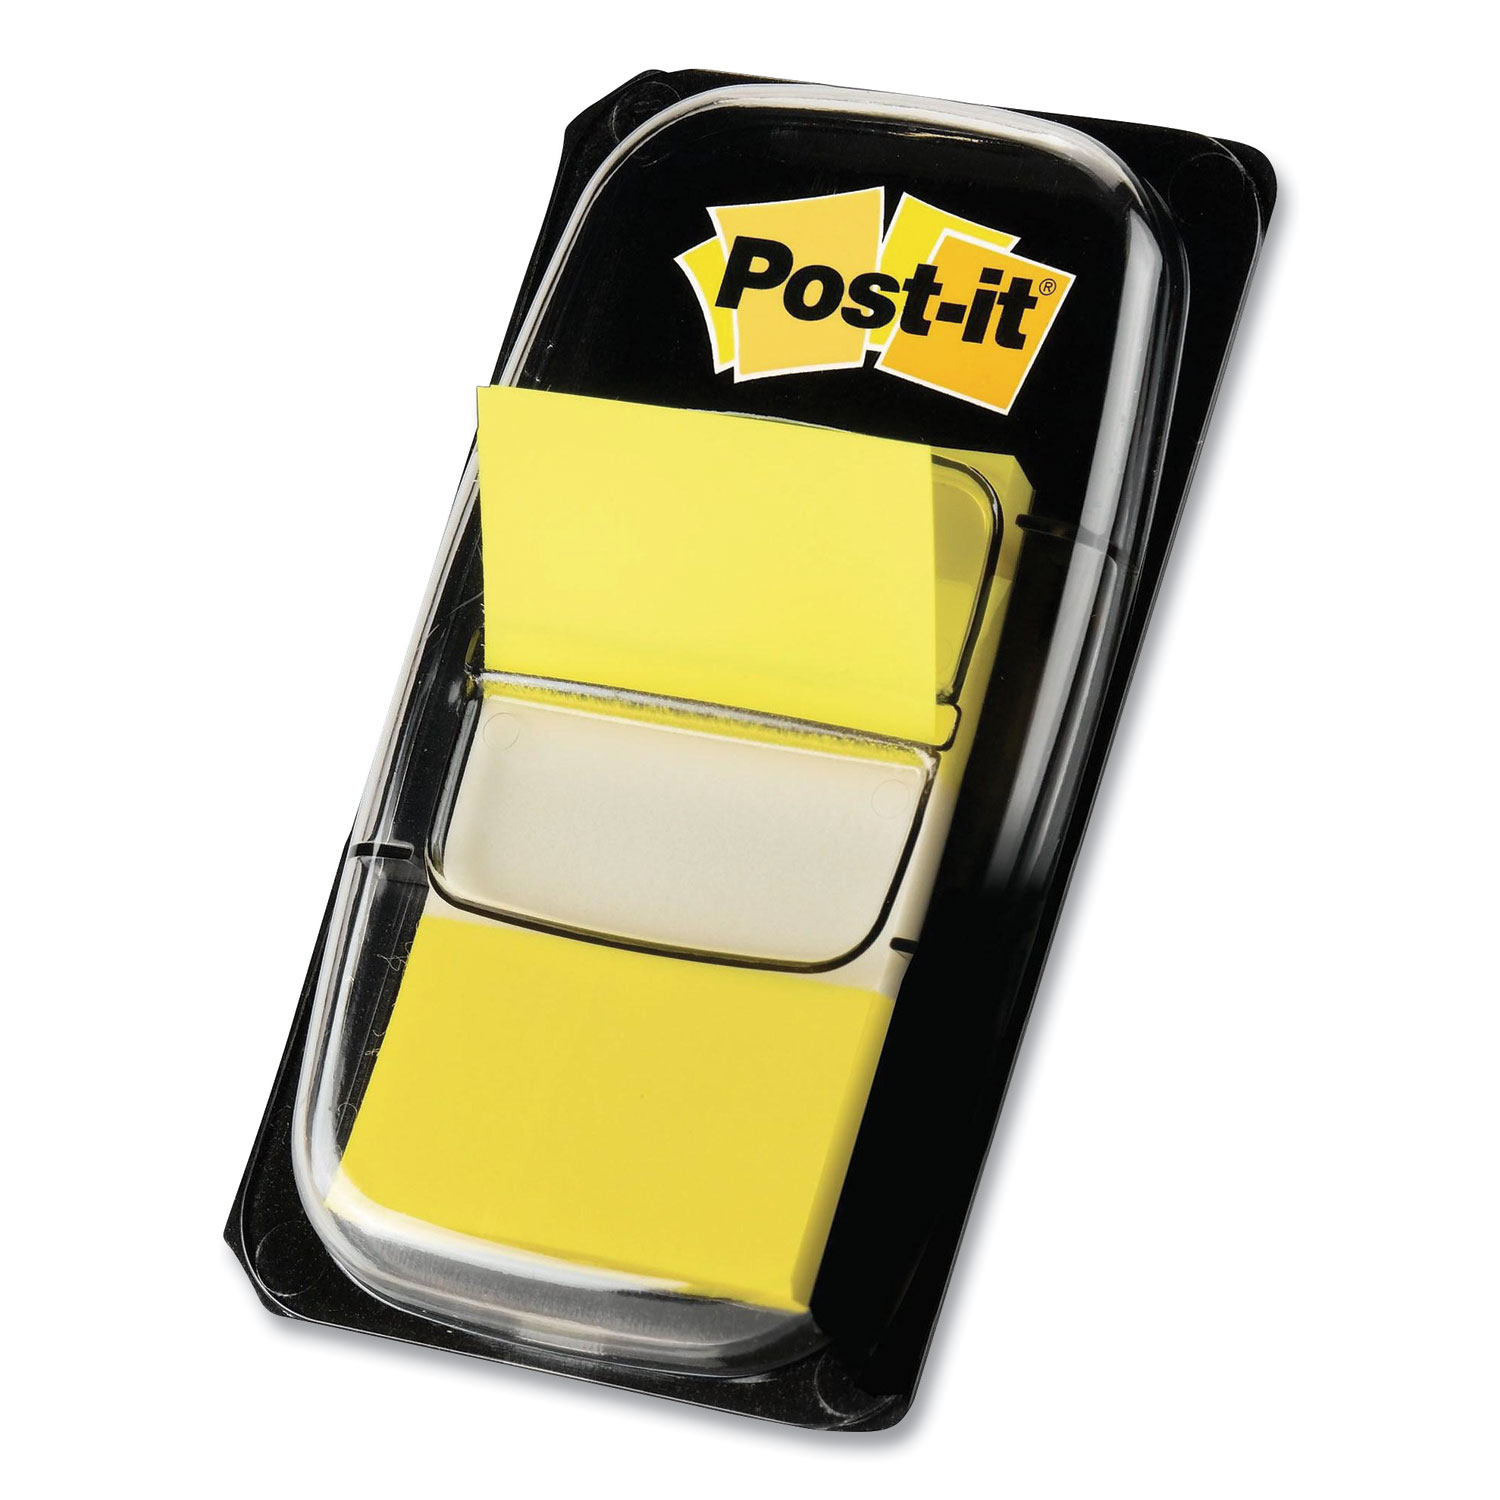  Post-it 680524 1 Flags Value Pack, Canary Yellow, 50 Flags/Dispenser, 24 Dispensers/Pack (MMM689371) 